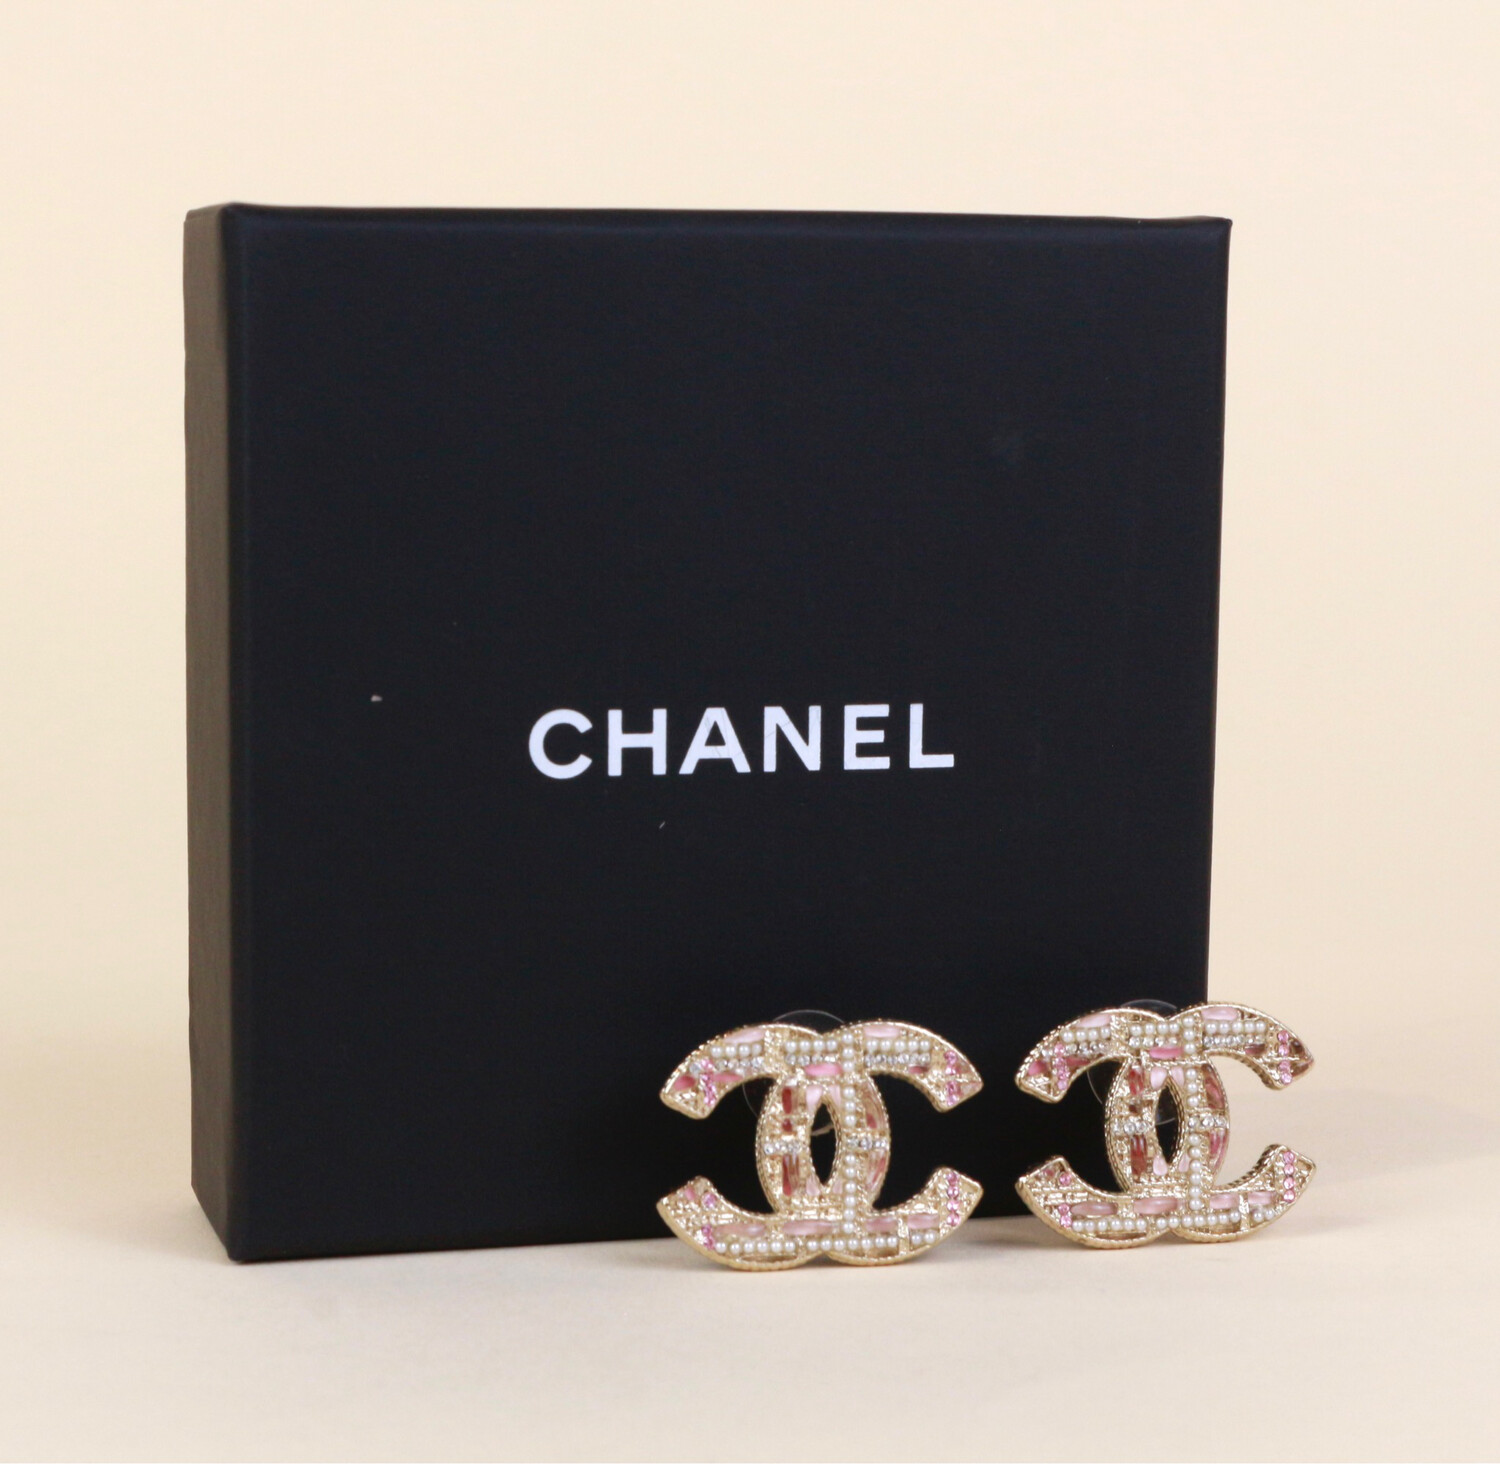 ​Chanel earrings with rhinestones and pearls